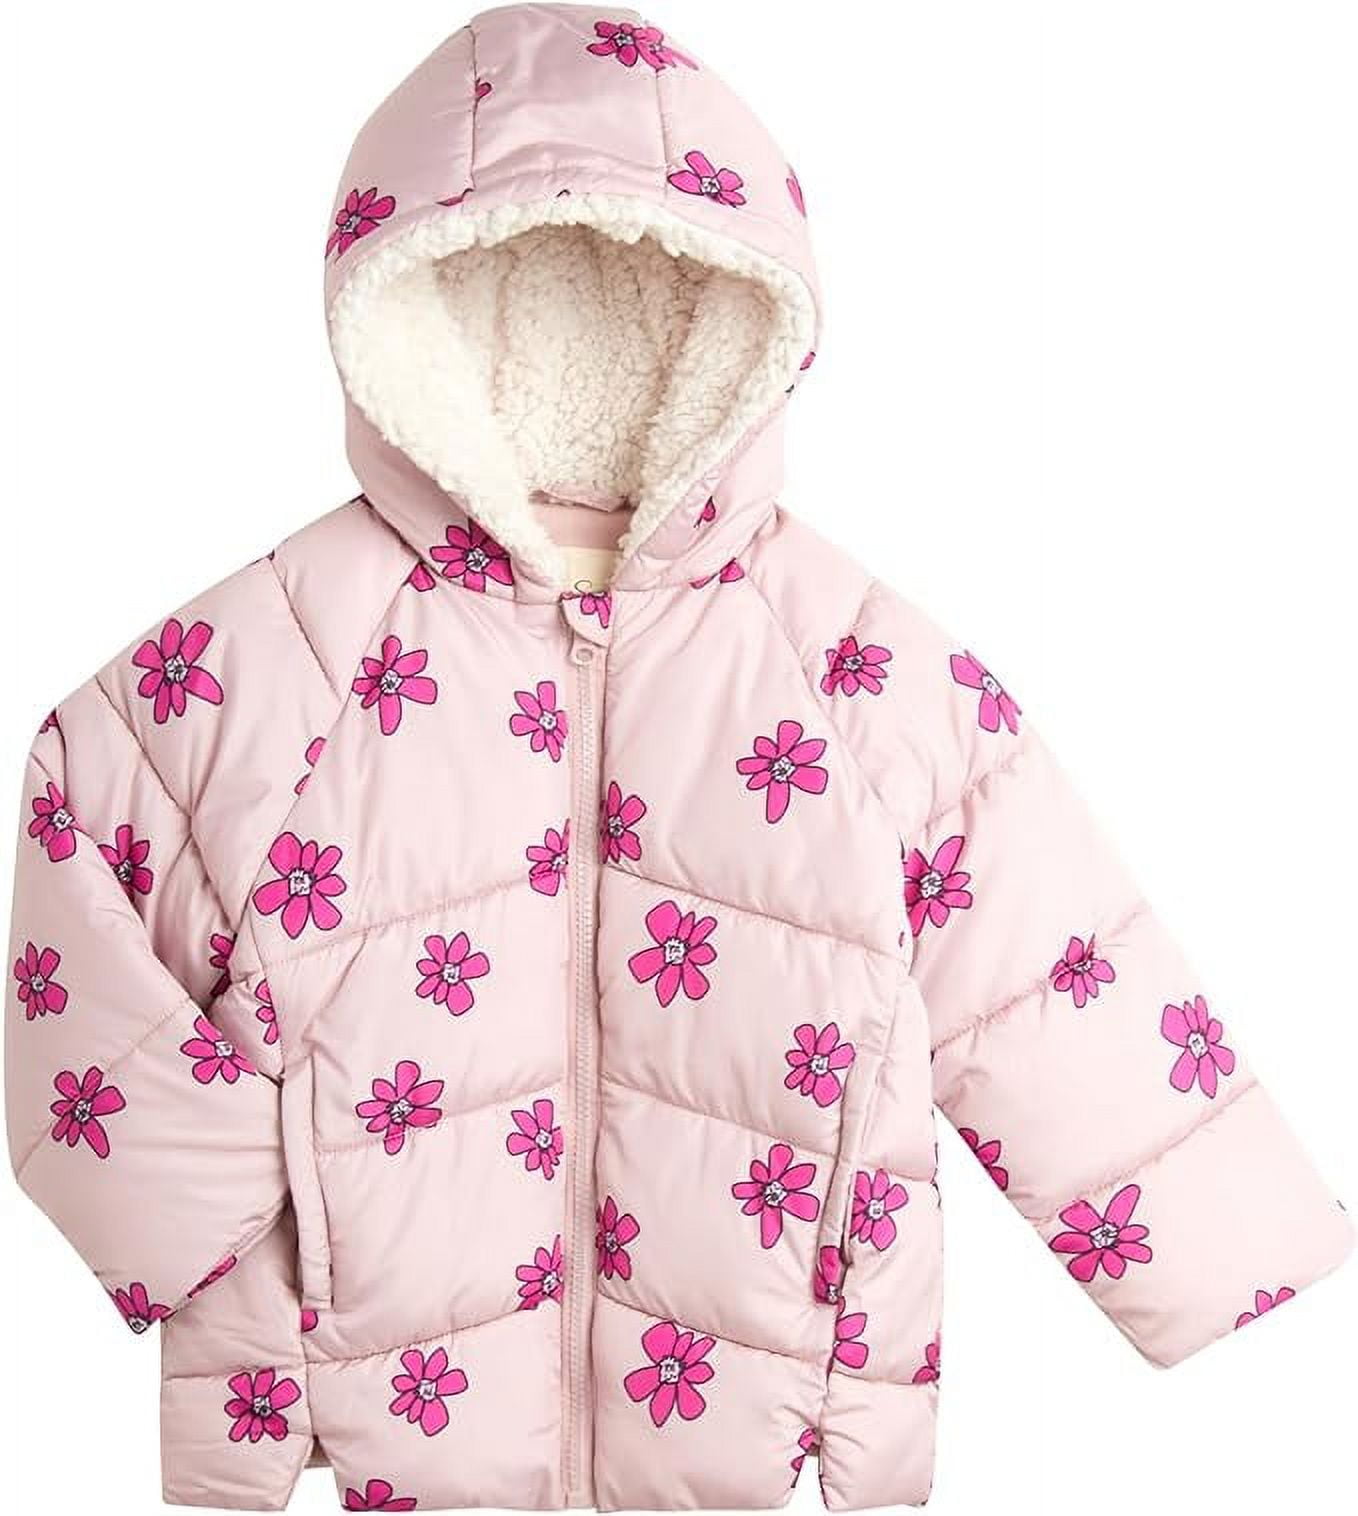 Jessica Simpson Baby Girls' Winter Jacket - Quilted Fleece Lined Puffer ...